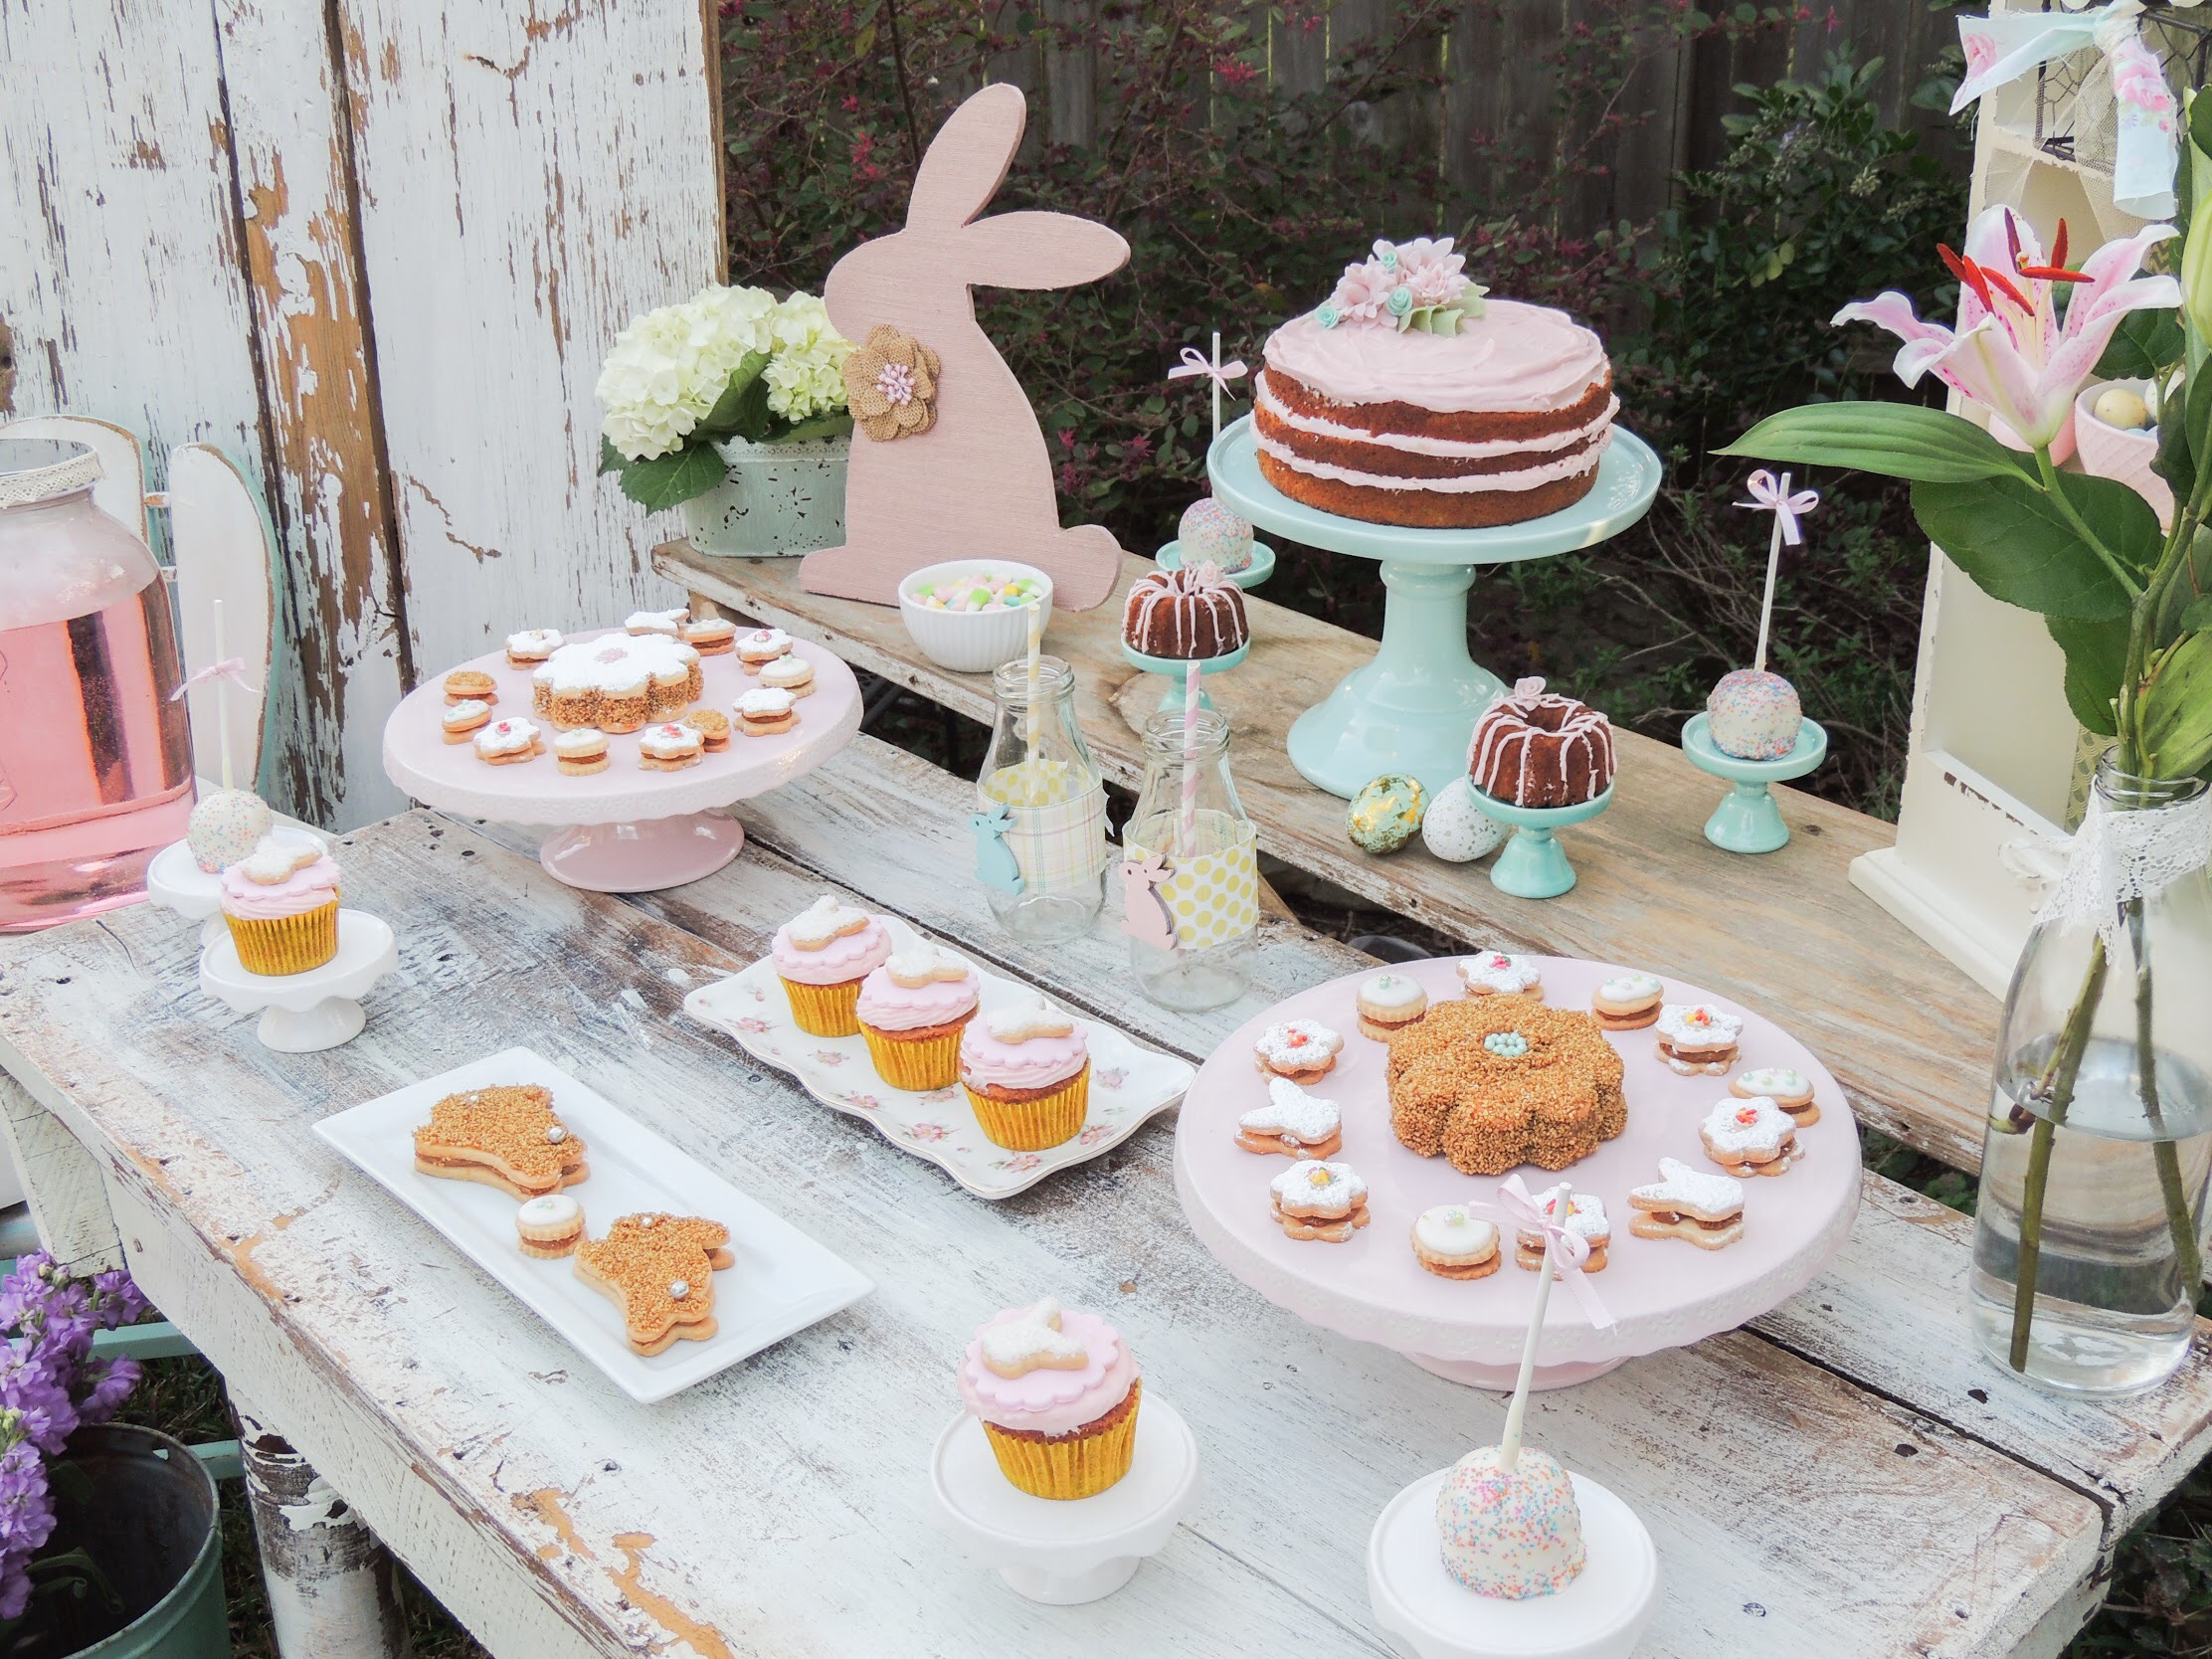 https://images.squarespace-cdn.com/content/v1/59eb9dfd692ebe60a346d3b3/1554406502559-3AYCIDFCMLTBJZH4KP4J/shabby+chic+easter+party